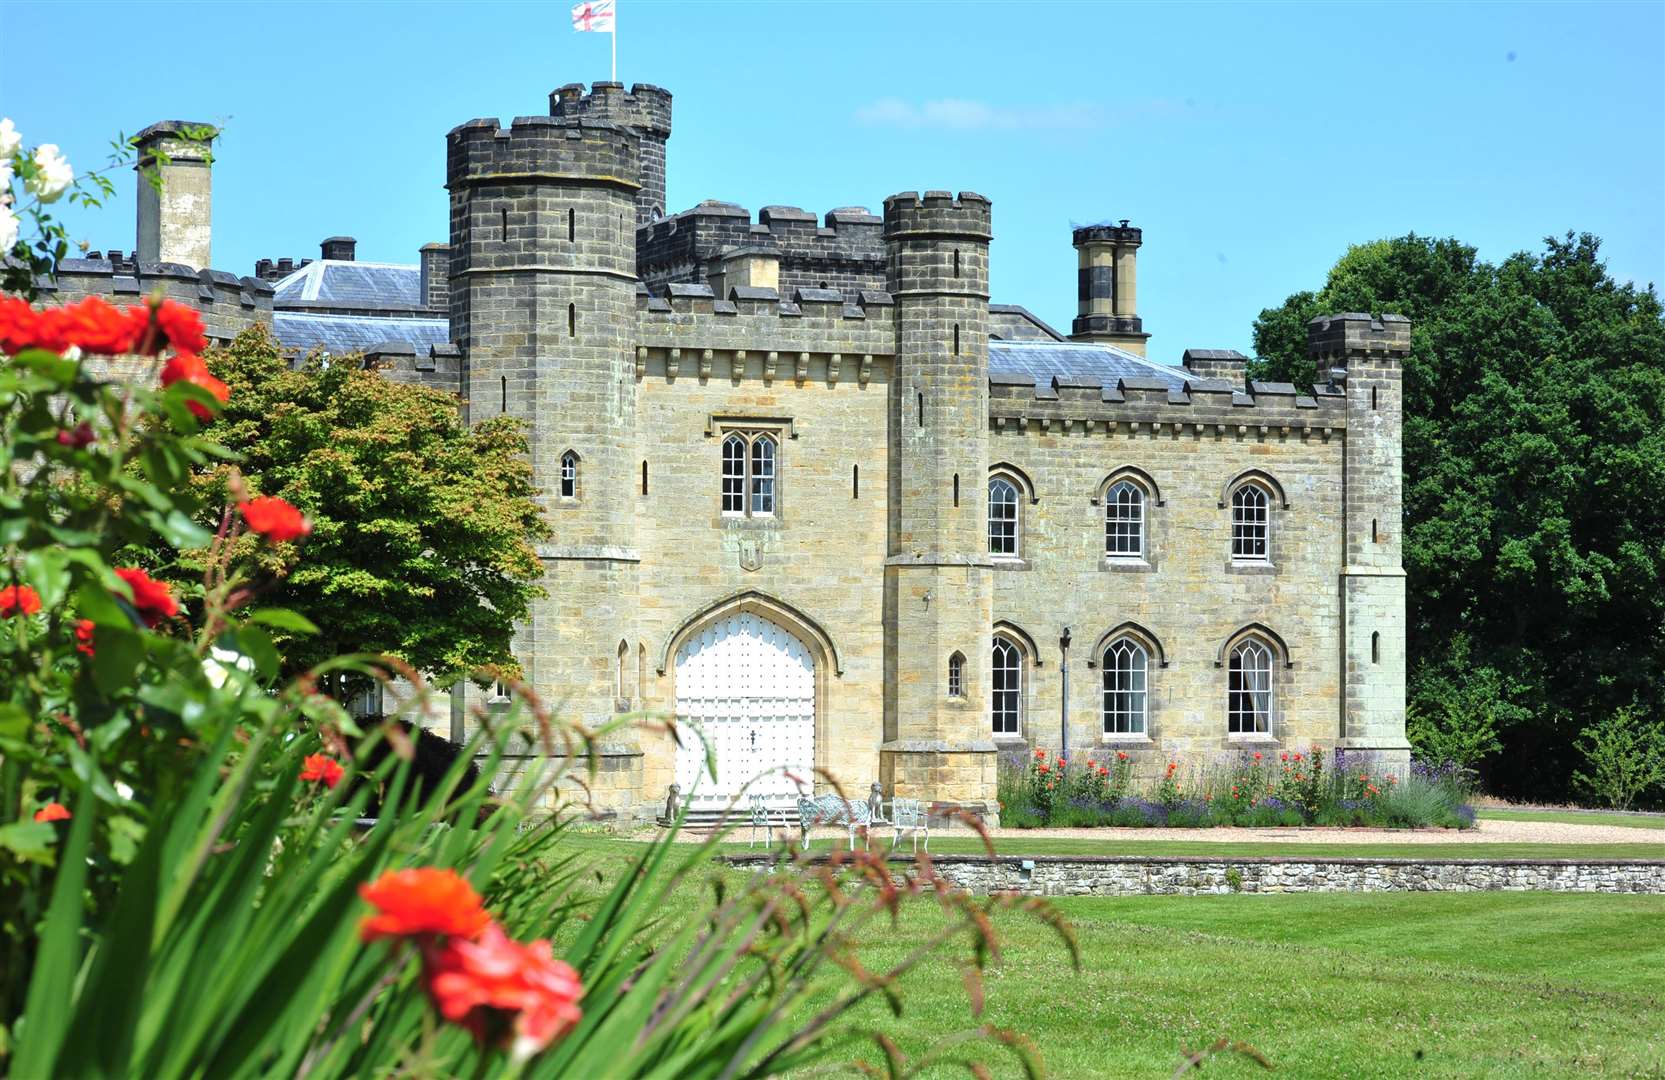 Chiddingstone Castle's literary festival this year has been cancelled